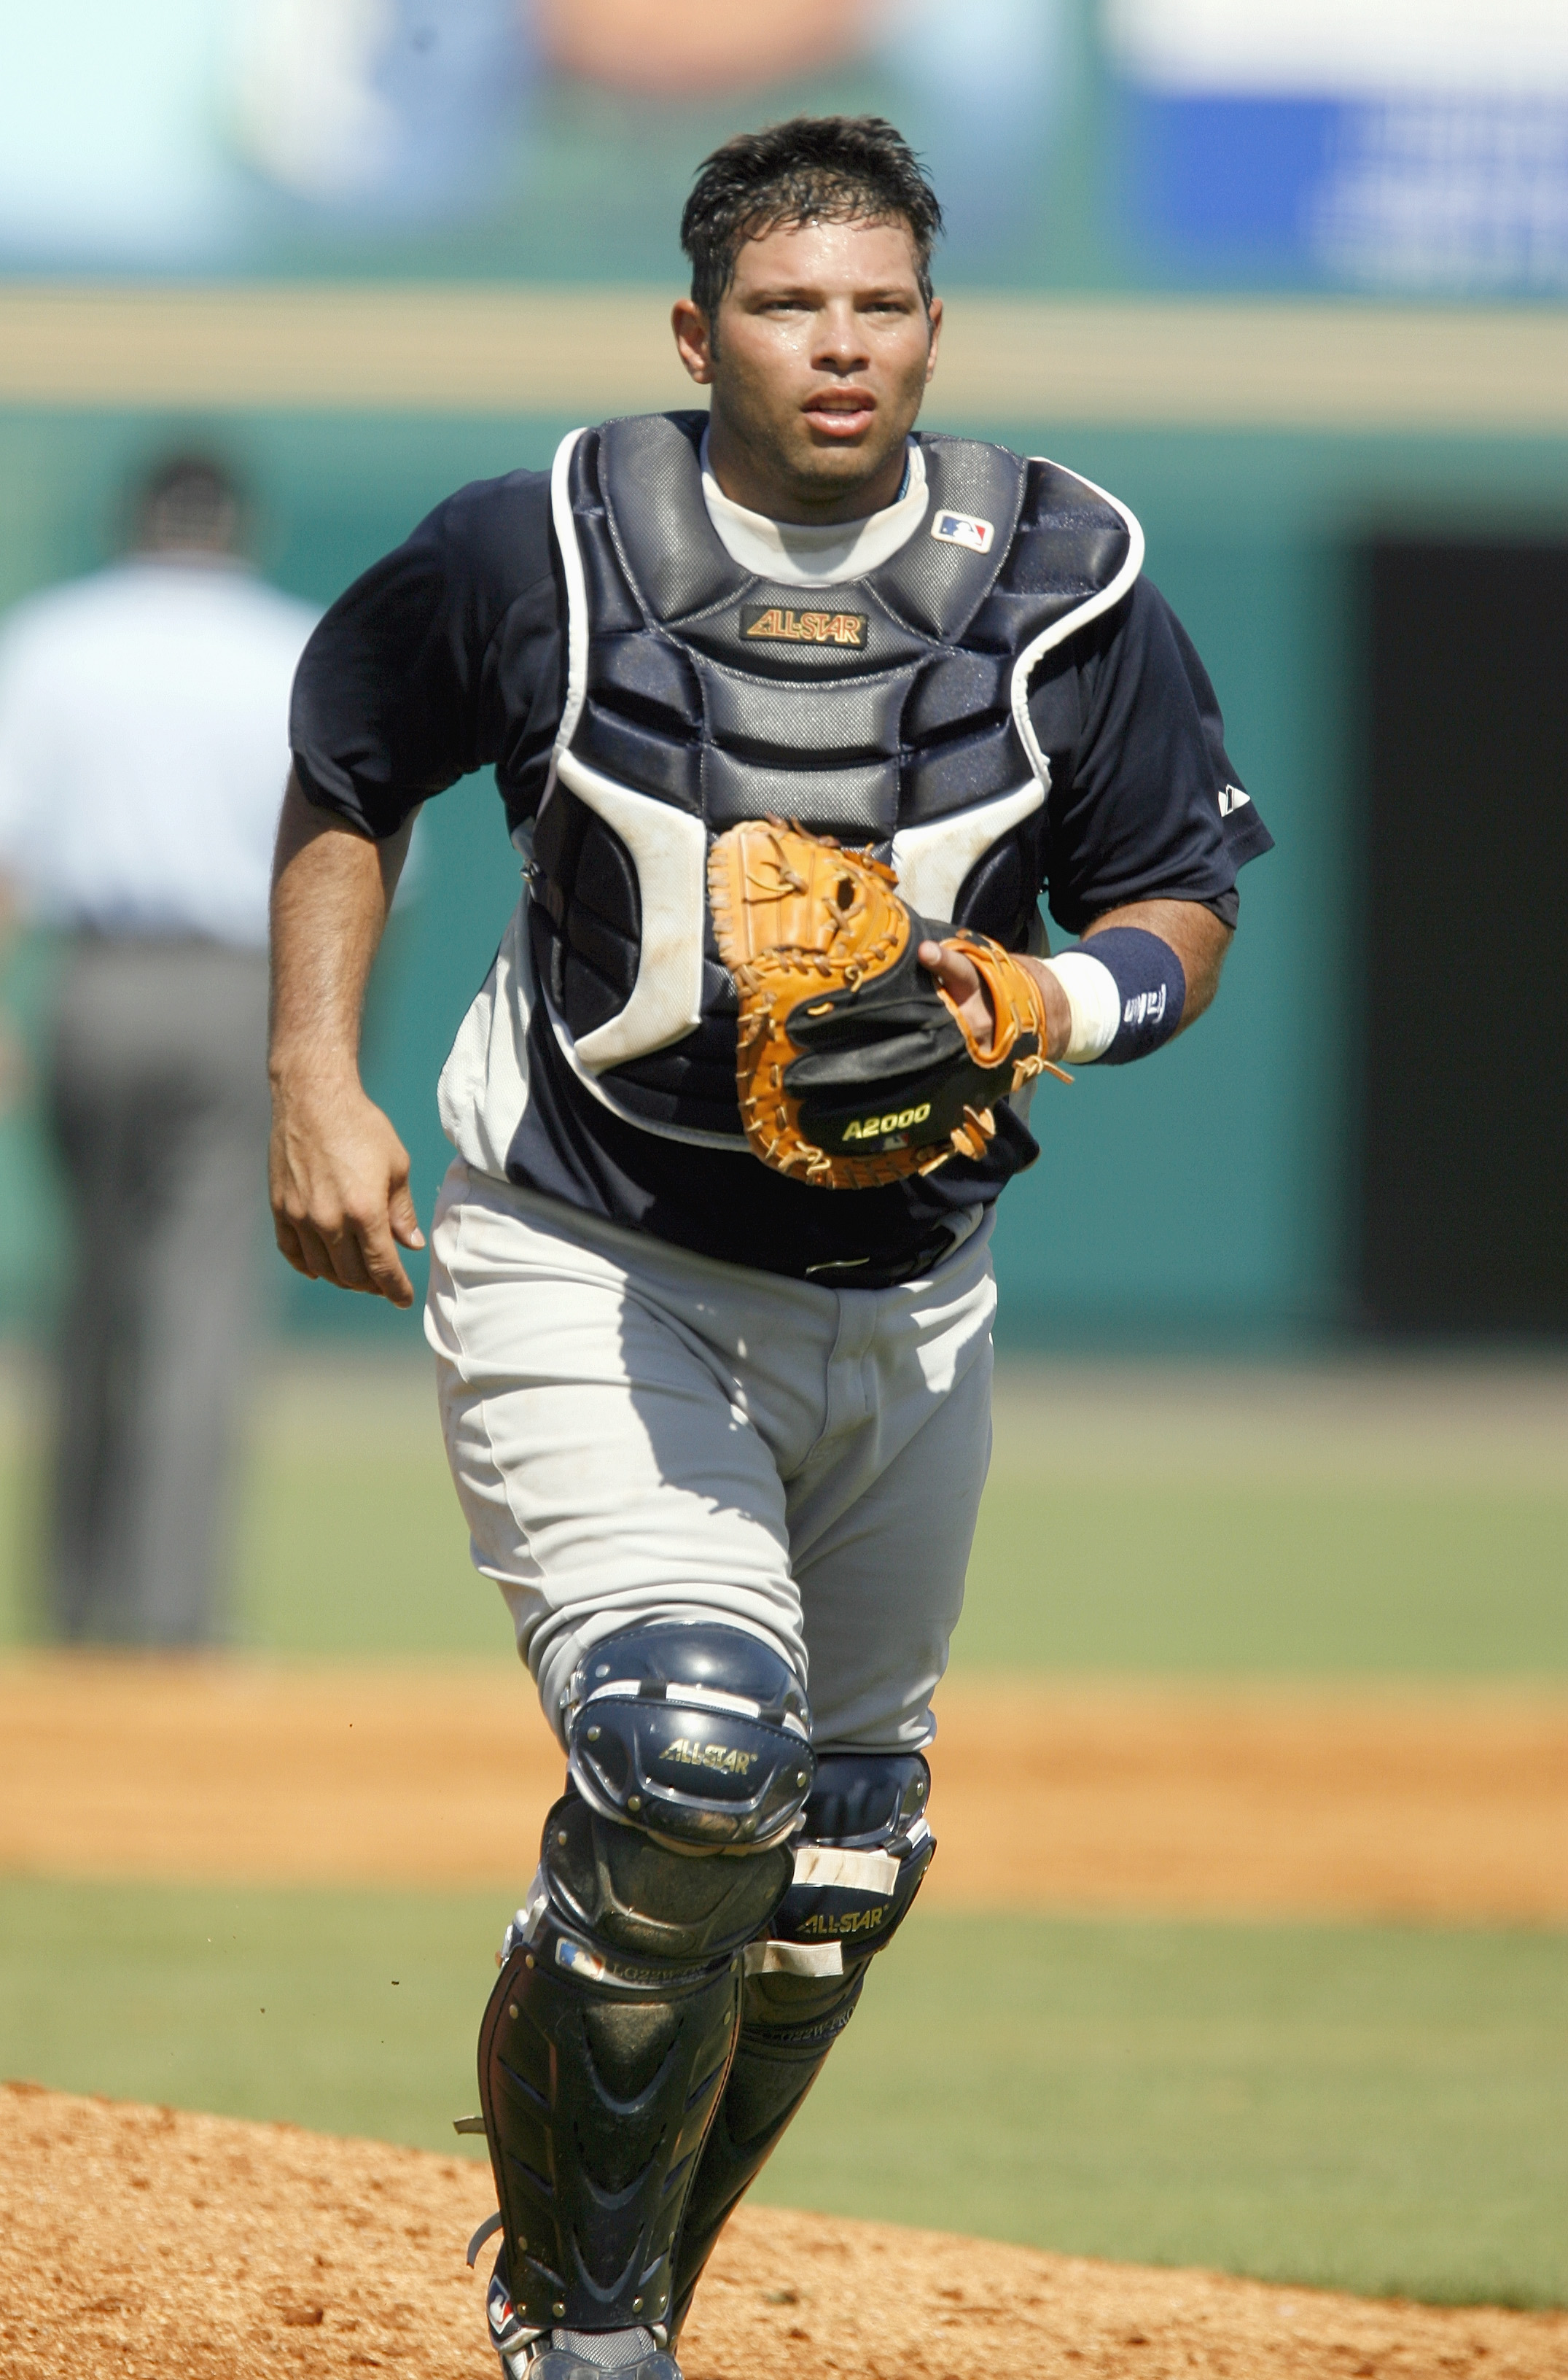 BRADENTON, FL - MARCH 10:  Catcher Raul Chavez #59 of the New York Yankees jogs on the field against the Pittsburgh Pirates during a Spring Training game on March 10, 2007 at McKechnie Field in Bradenton, Florida. New York won the game 5-3. (Photo By Greg